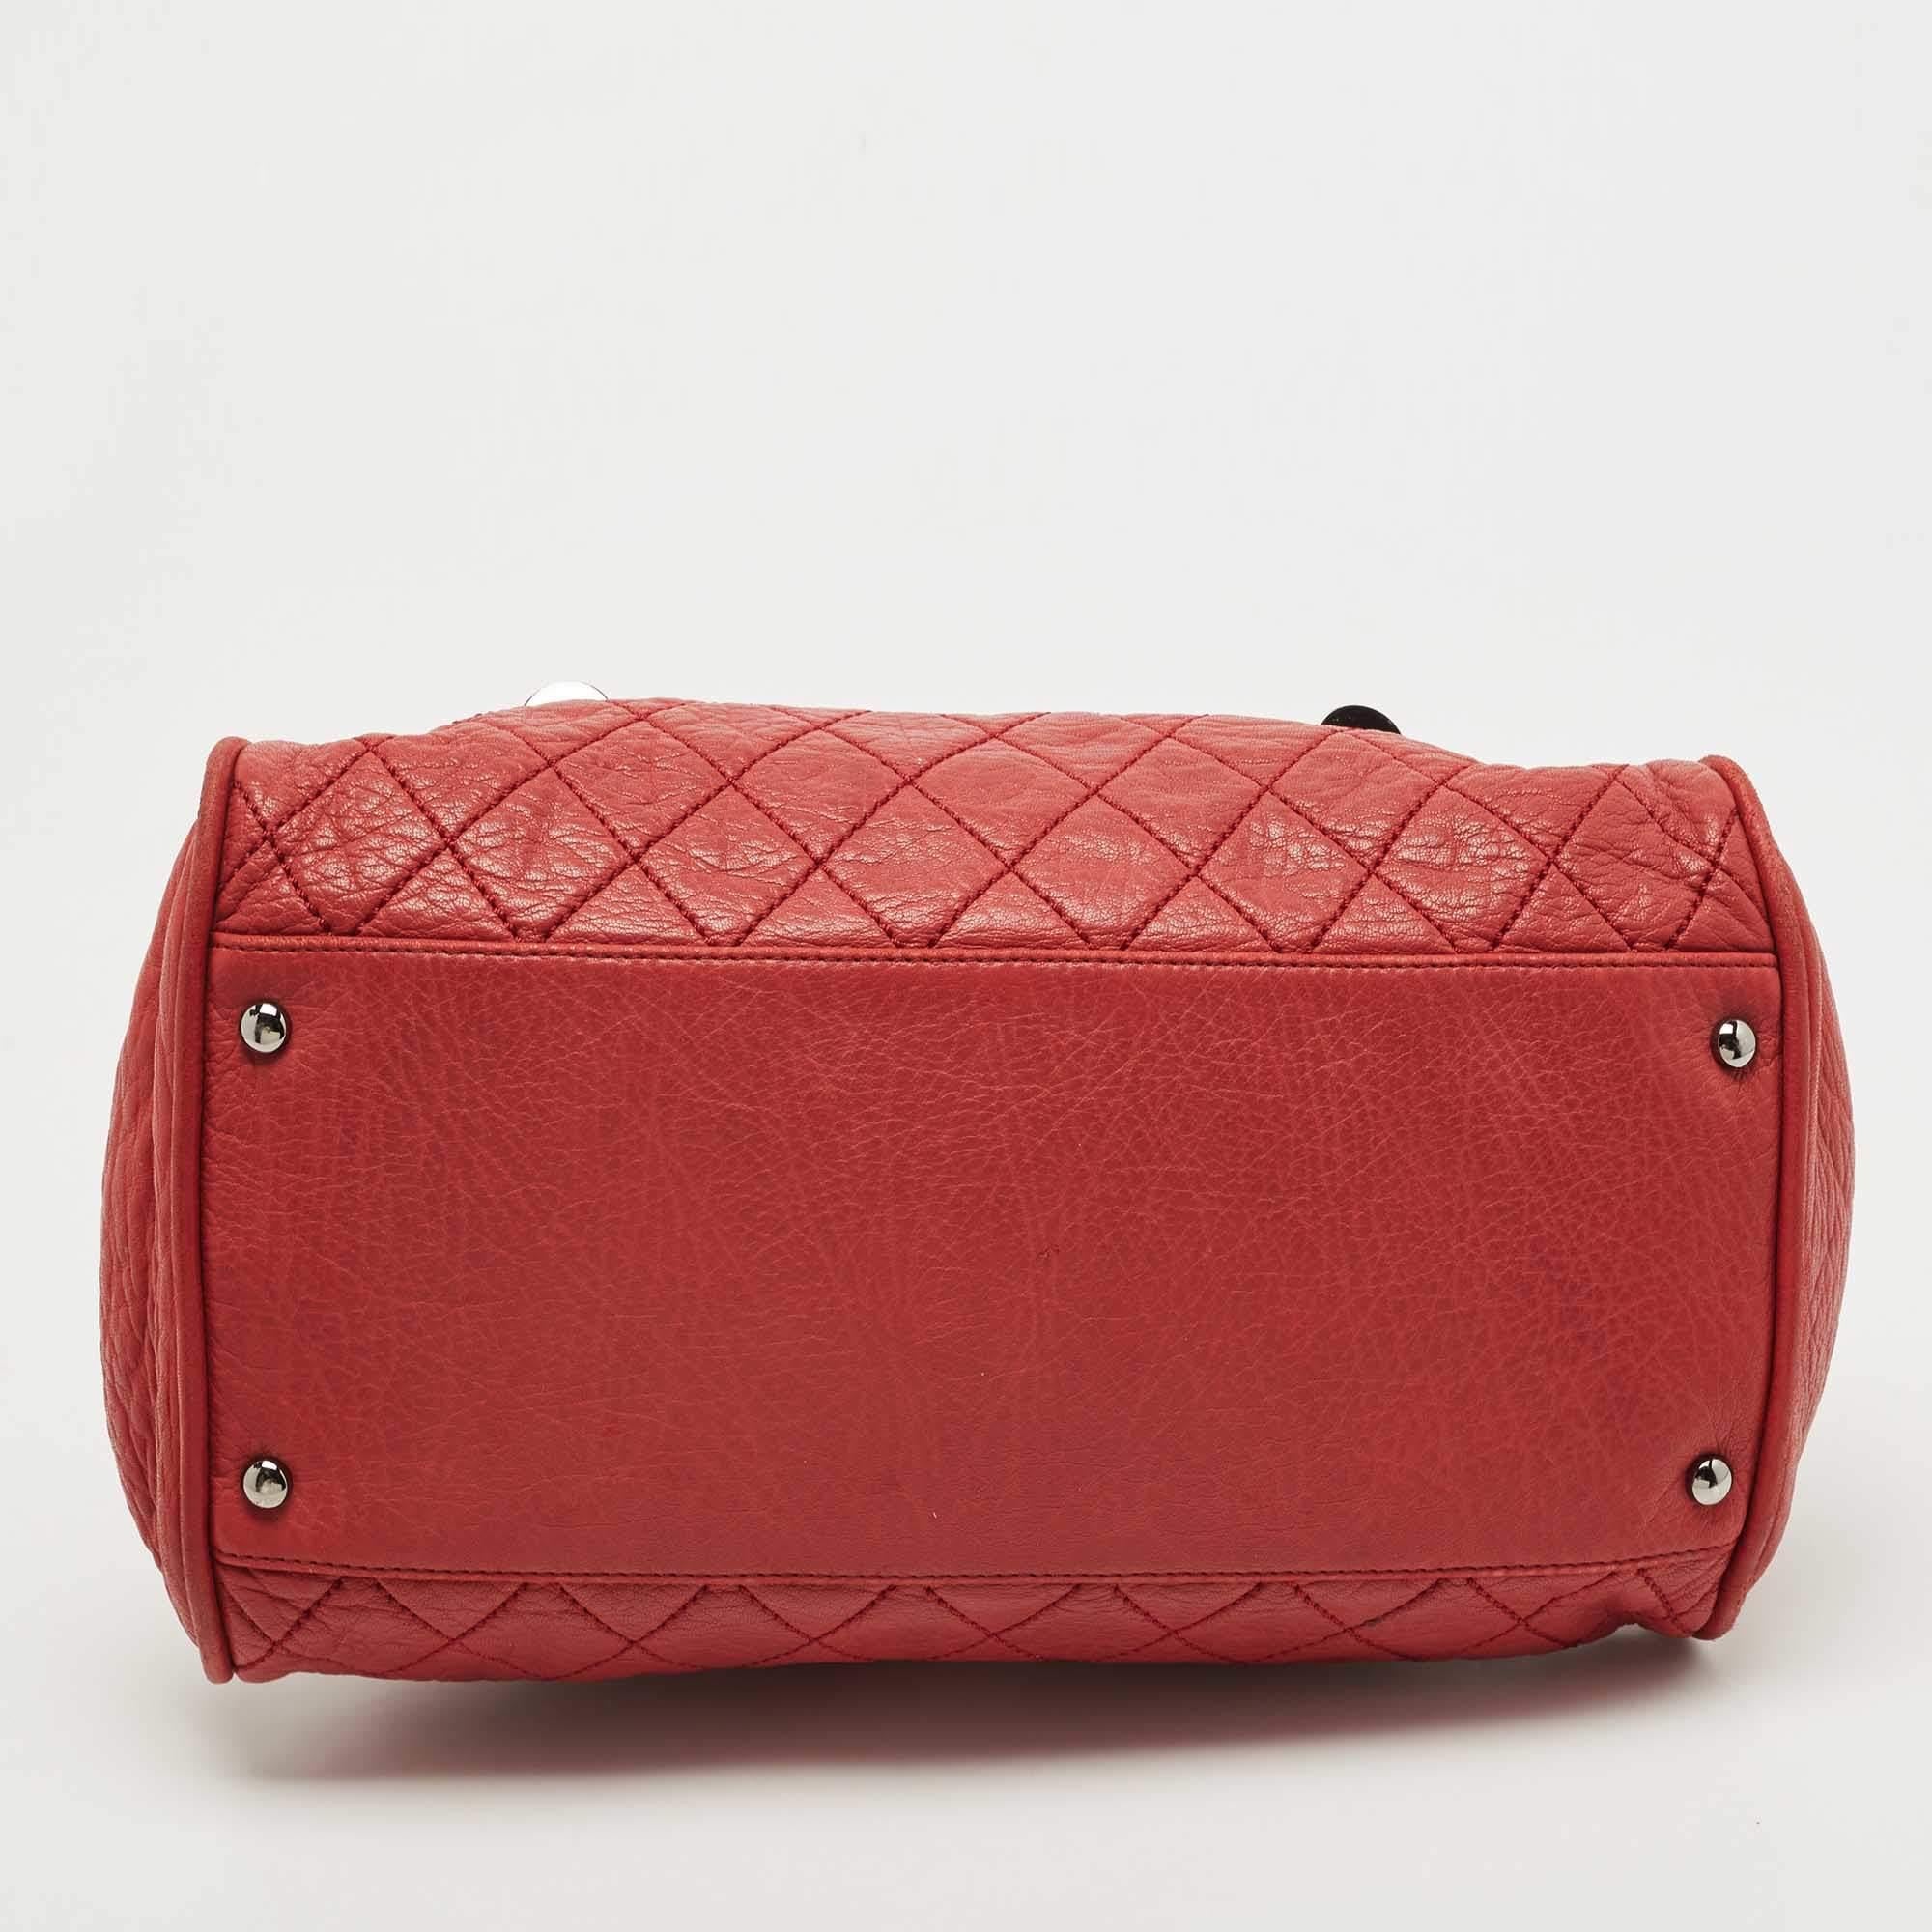 Chanel Red Quilted Leather Lady Braid Bowler Bag 1